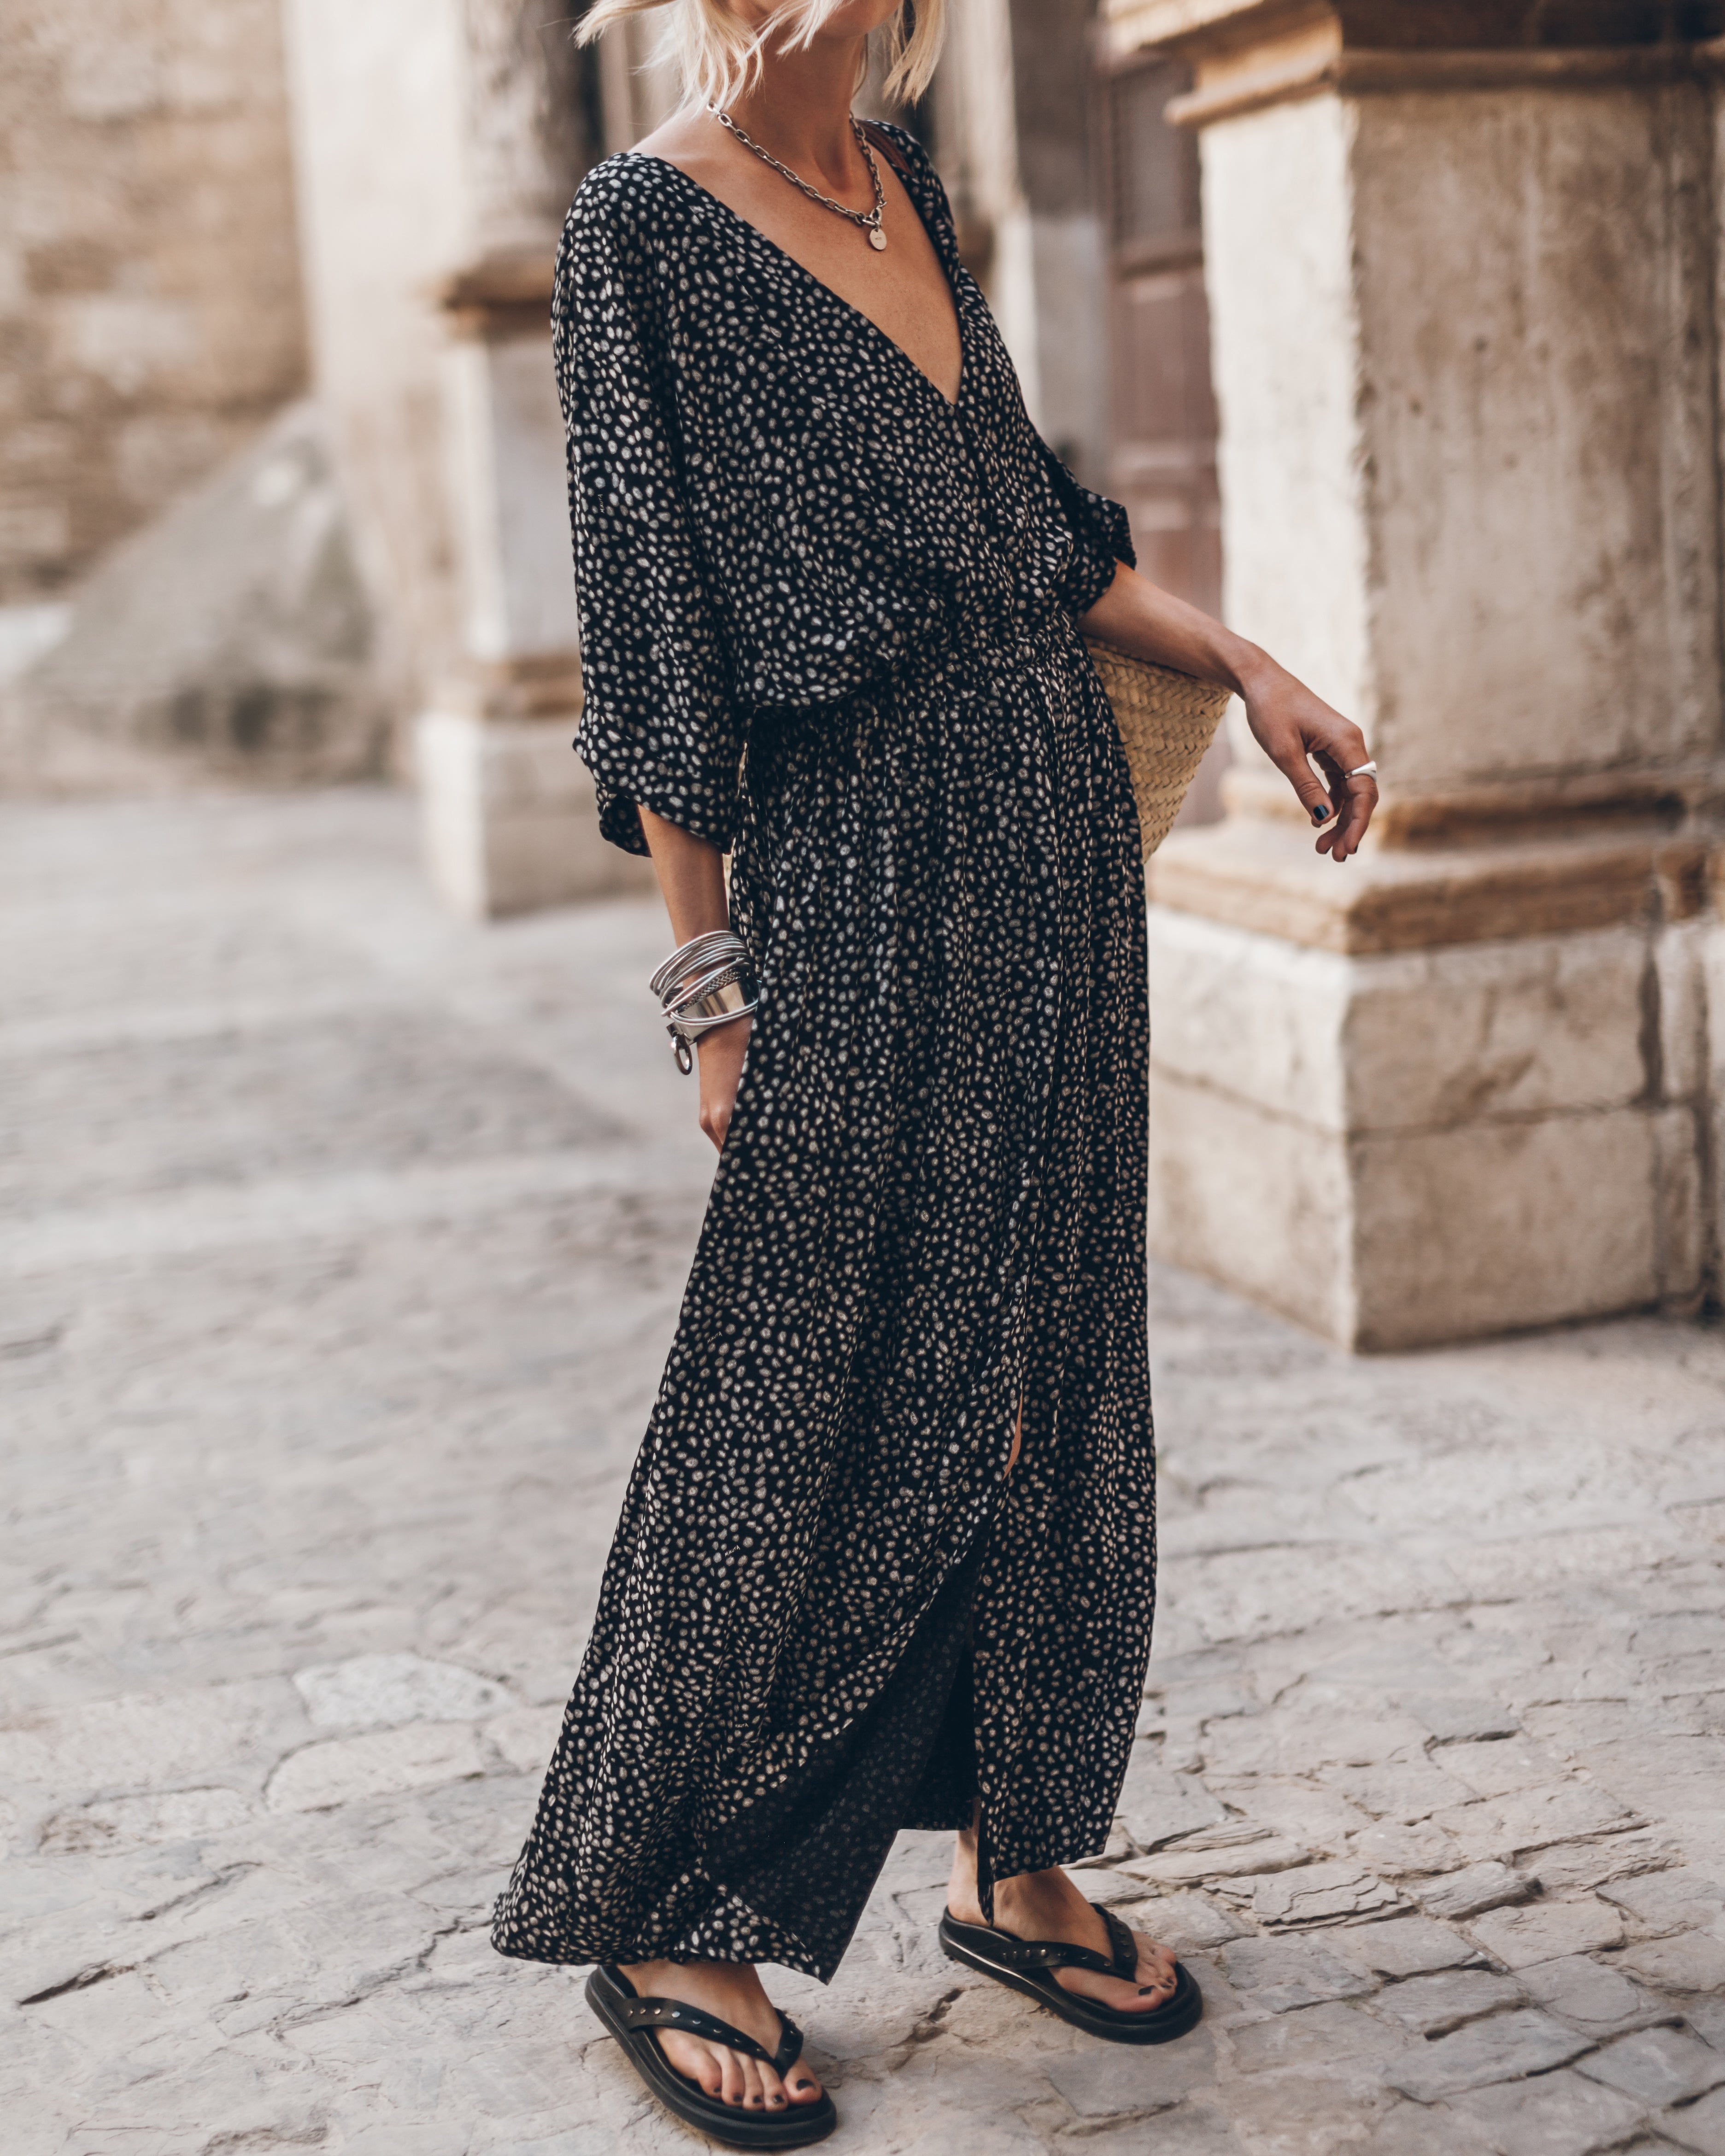 The Black Dotted Long Chill Dress